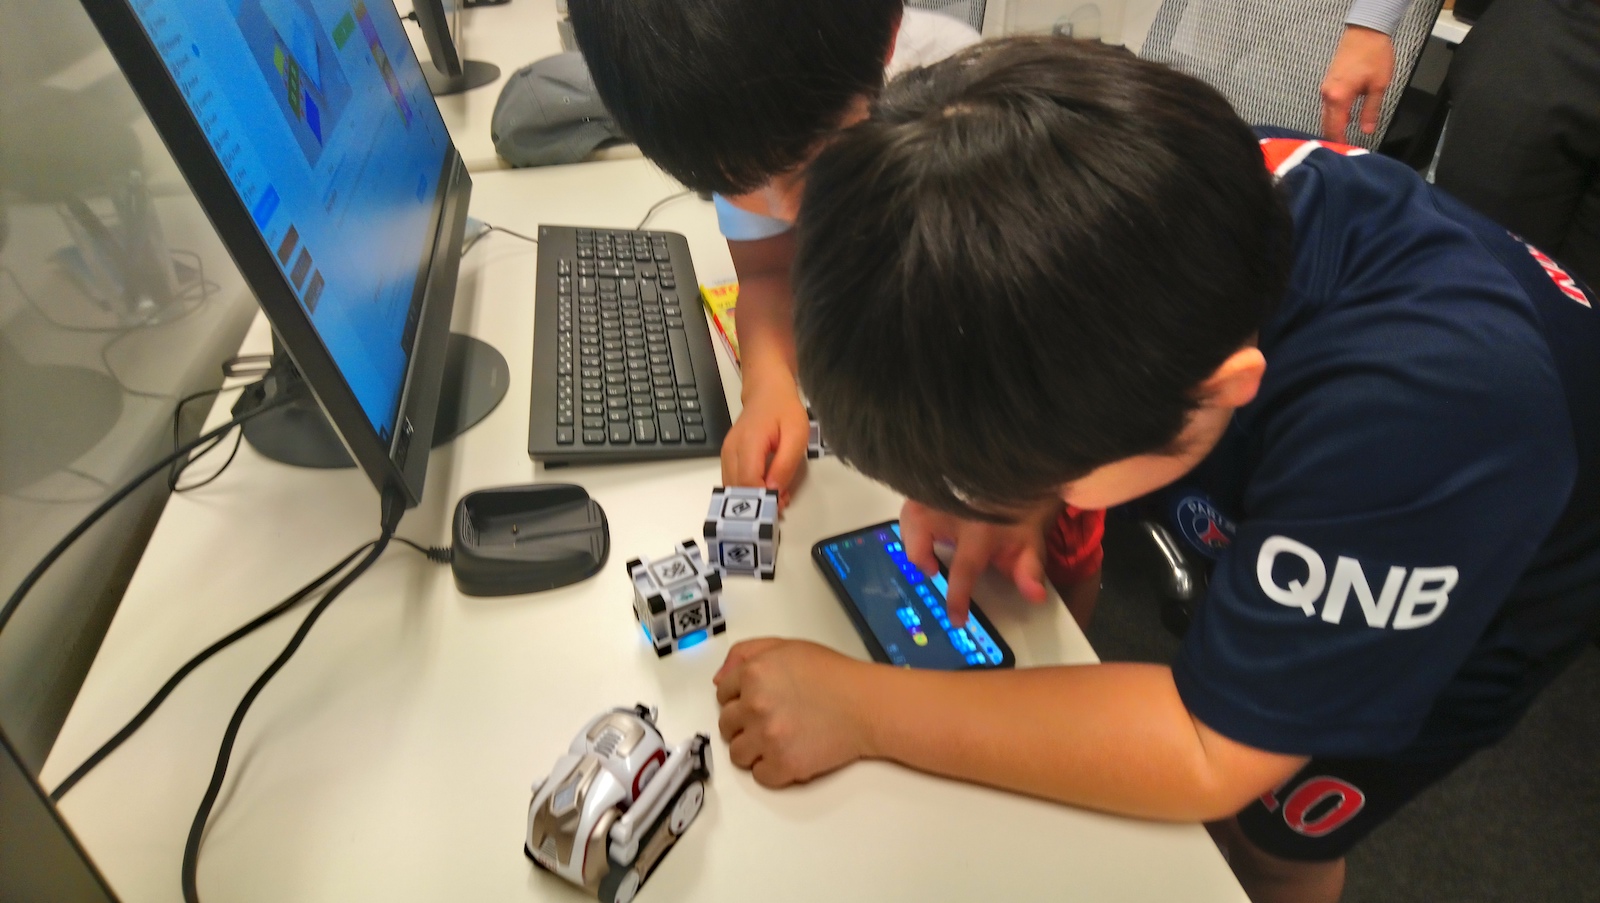 Tokyo Coding Club Introduces Virtual Tech Lessons To Help Parents Cope With Kids Not Able To Attend School Japan Today - online roblox coding classes online events families online